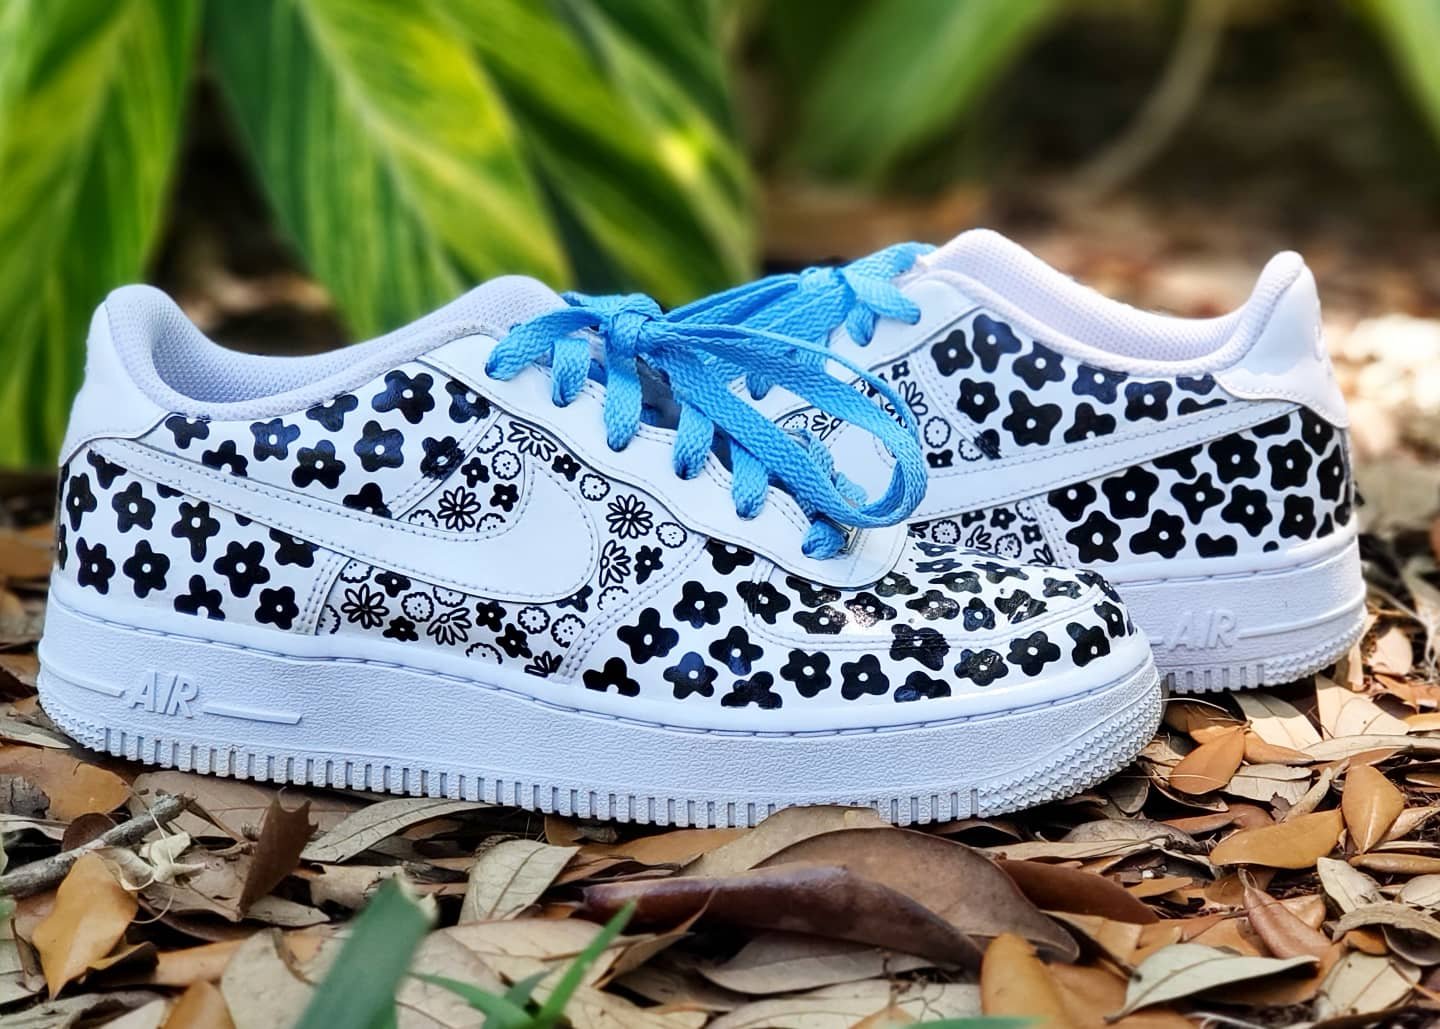  pattern: wildflower   shoes: nike af-1    laces:  colored flat, carolina blue  aglets: as is  